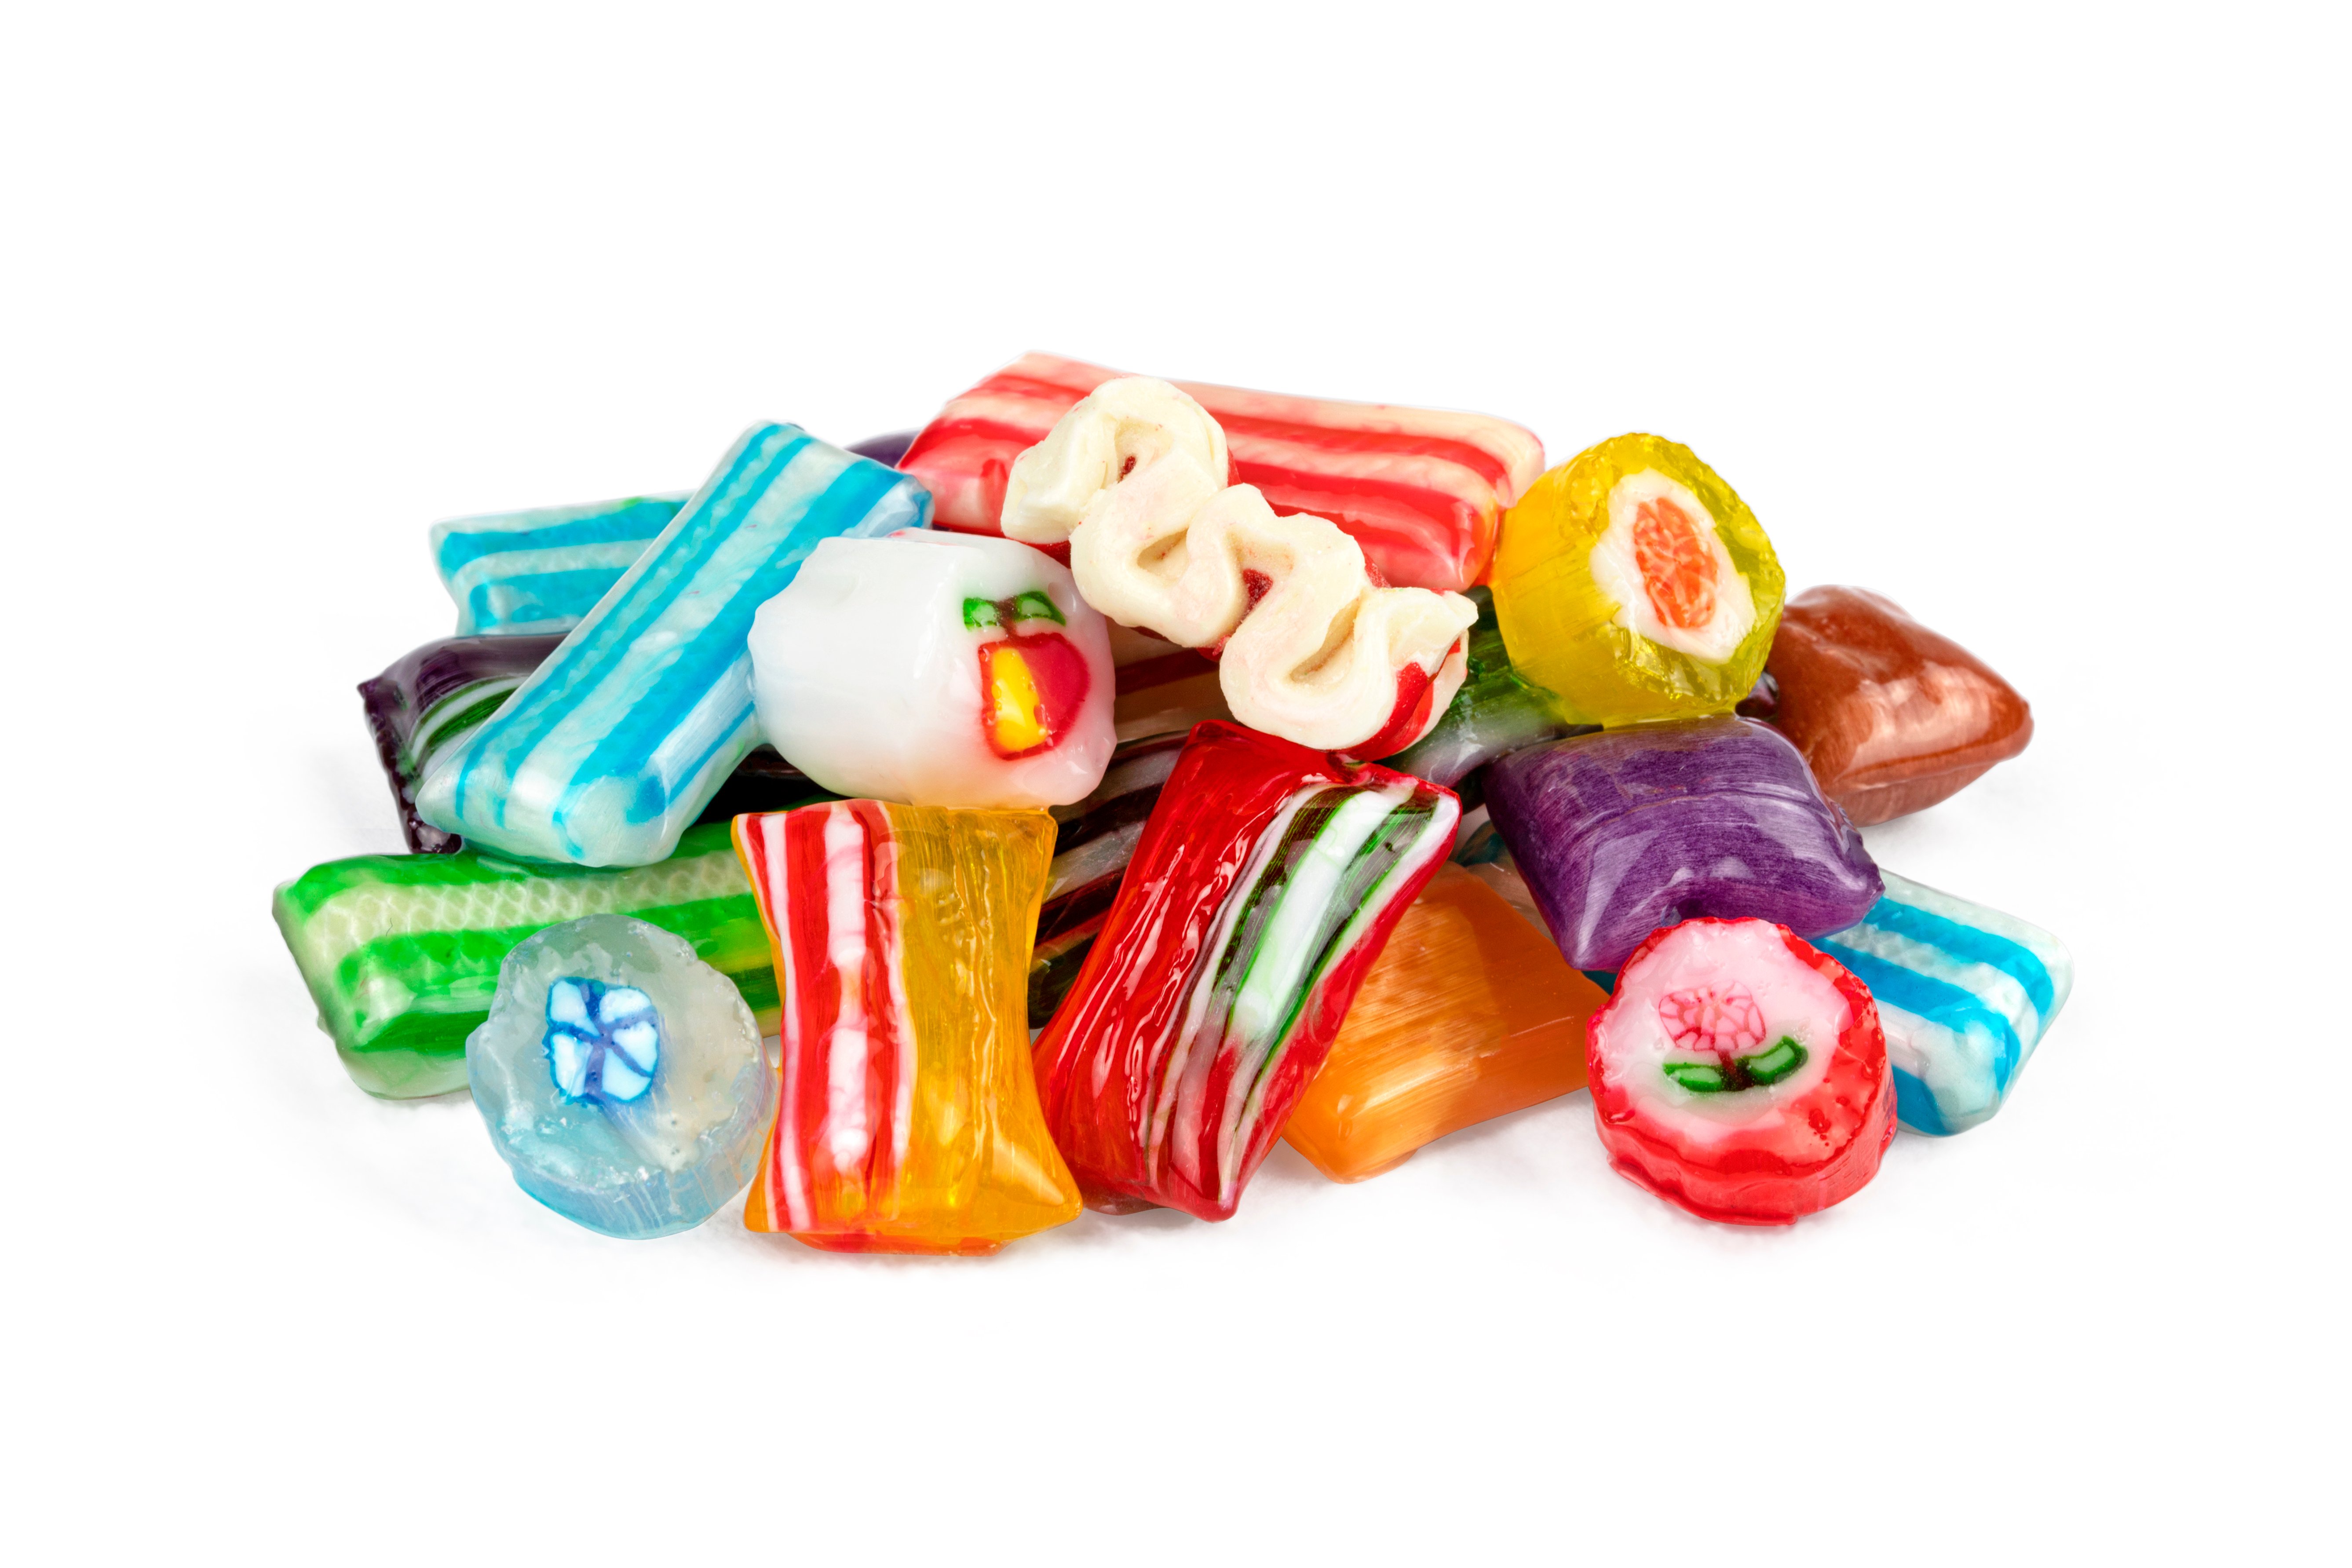 A Pa. favorite candy is featured on this new sweet and fashionable